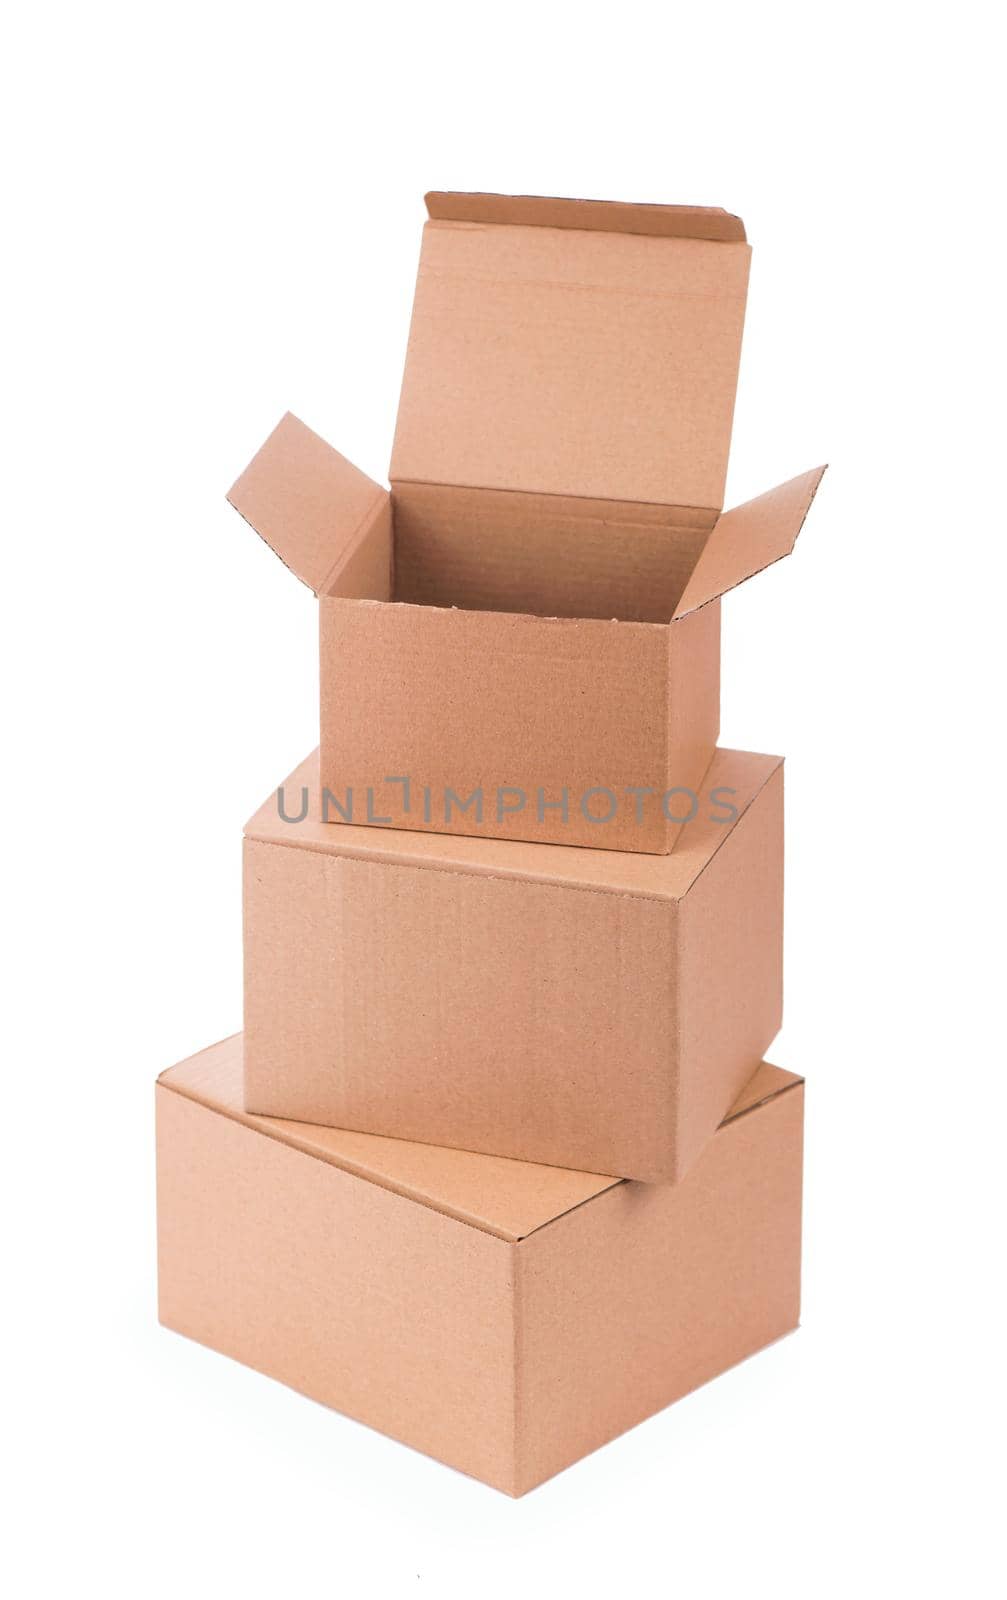 cardboard box isolated on a white background by aprilphoto